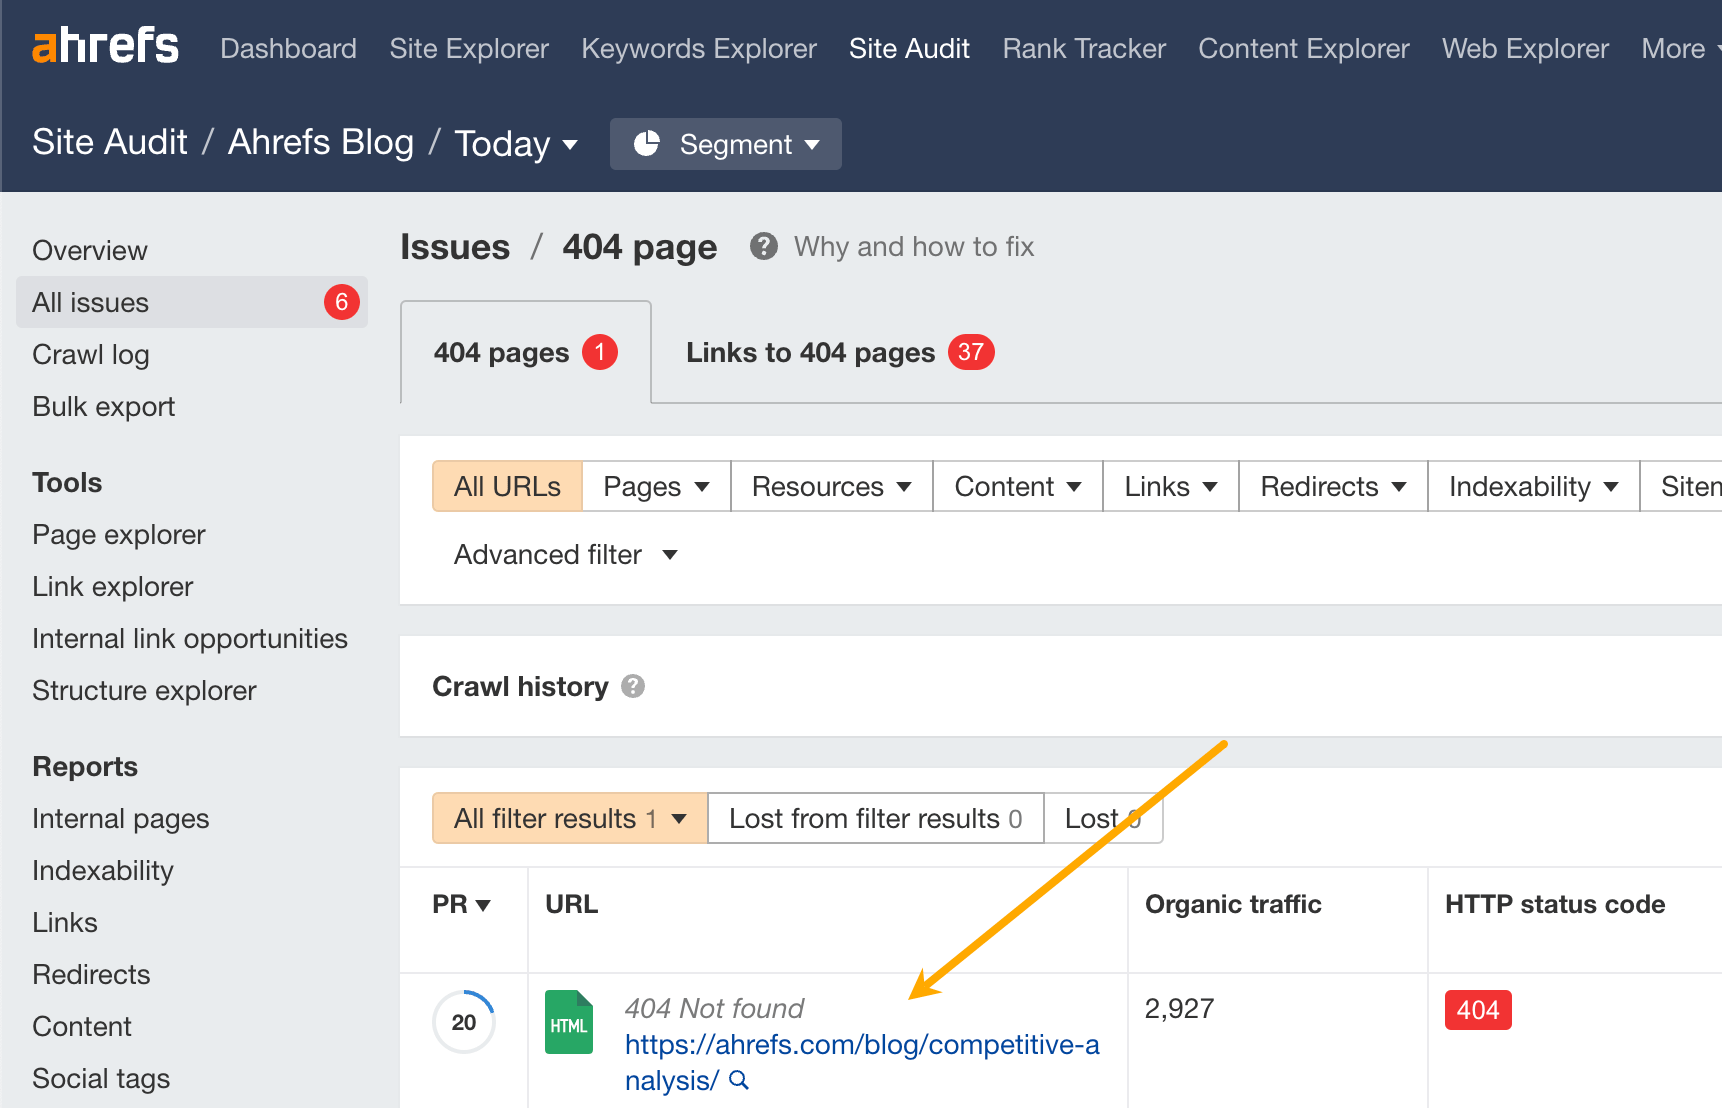 Showing 404 pages in Ahrefs' Site Audit